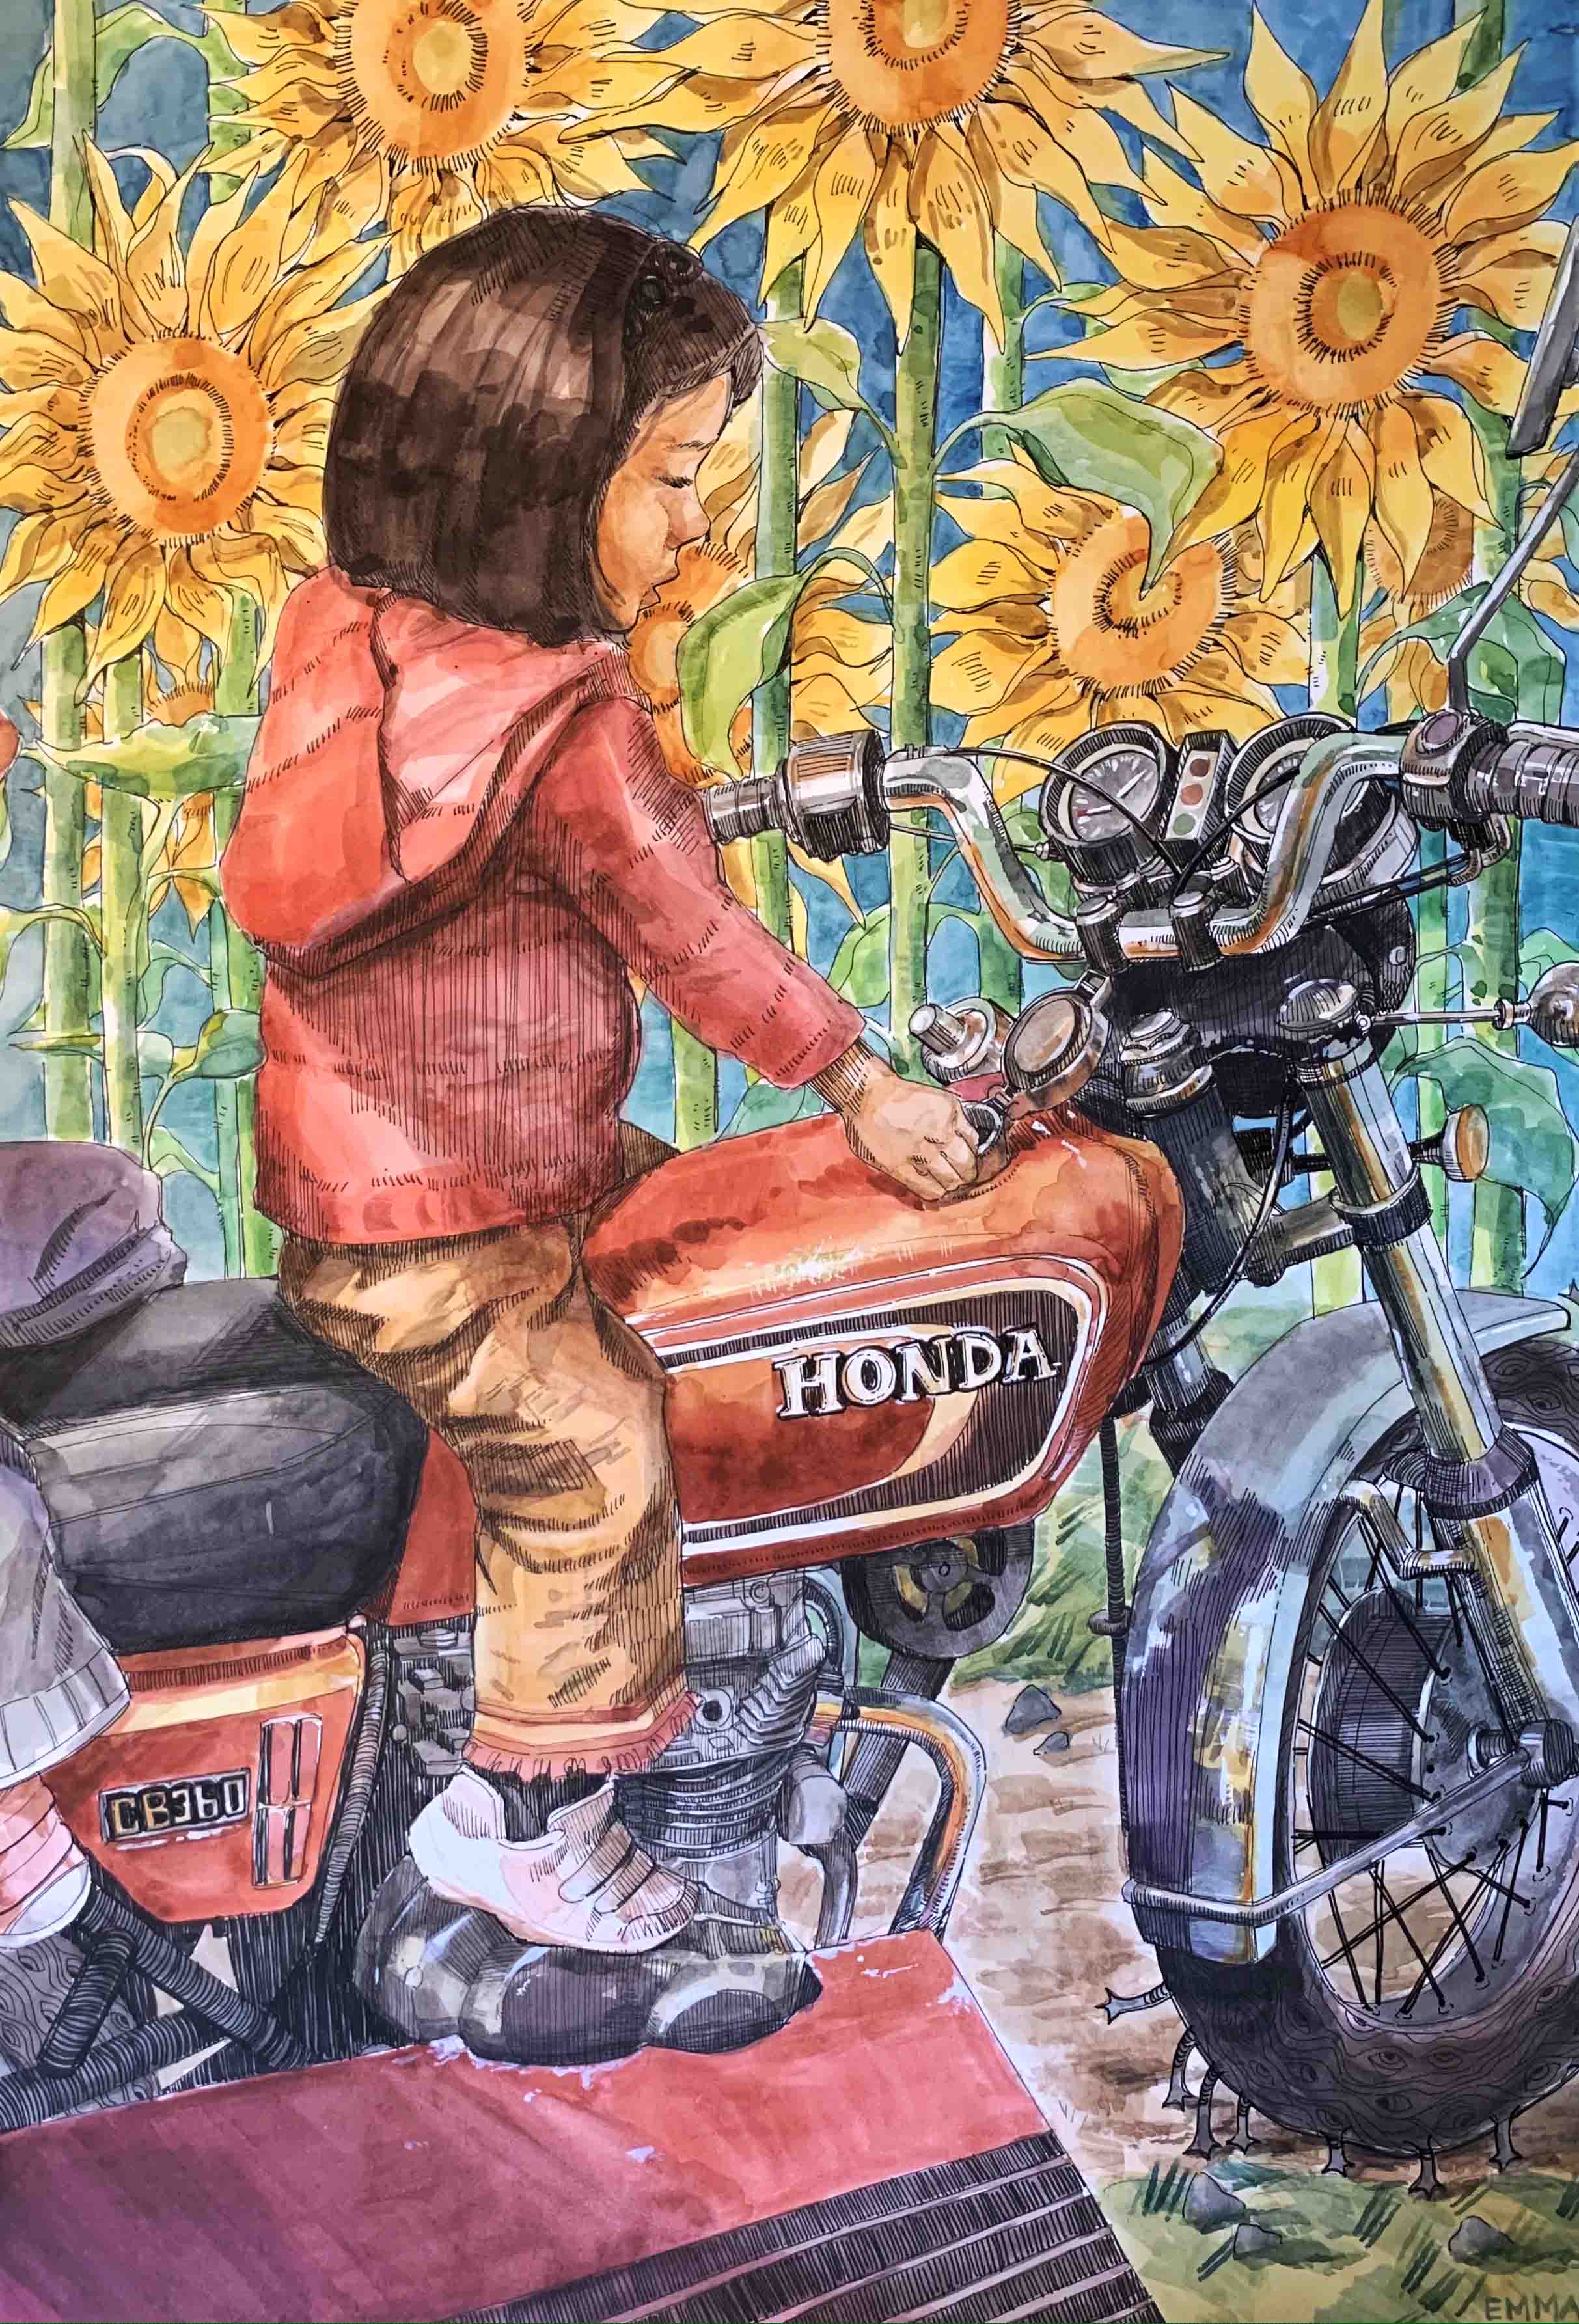 A watercolor painting of a young girl on a motorcycle